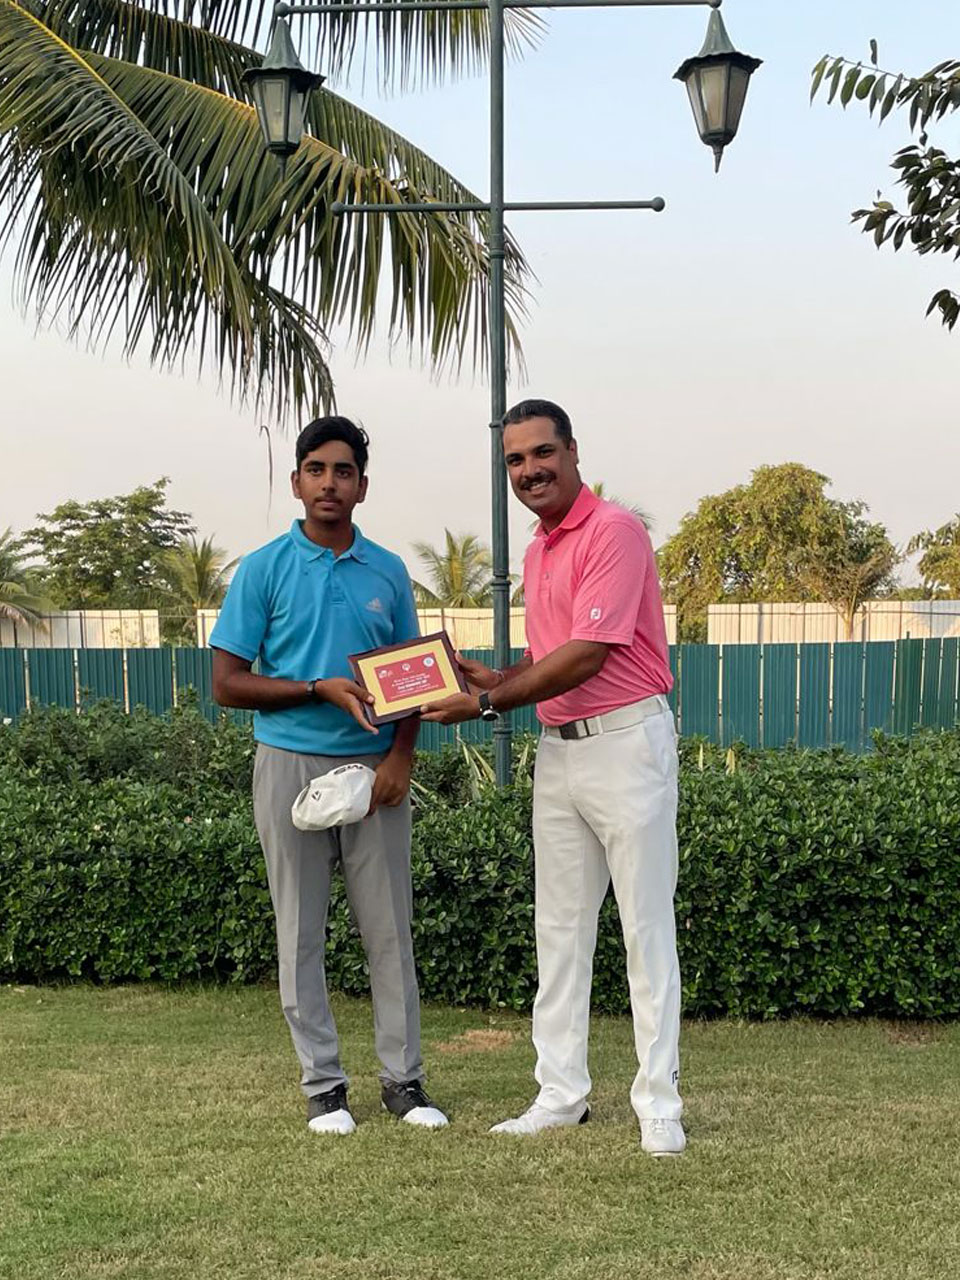 Praveer Arora has his first top 3 finish in a Zonal tournament